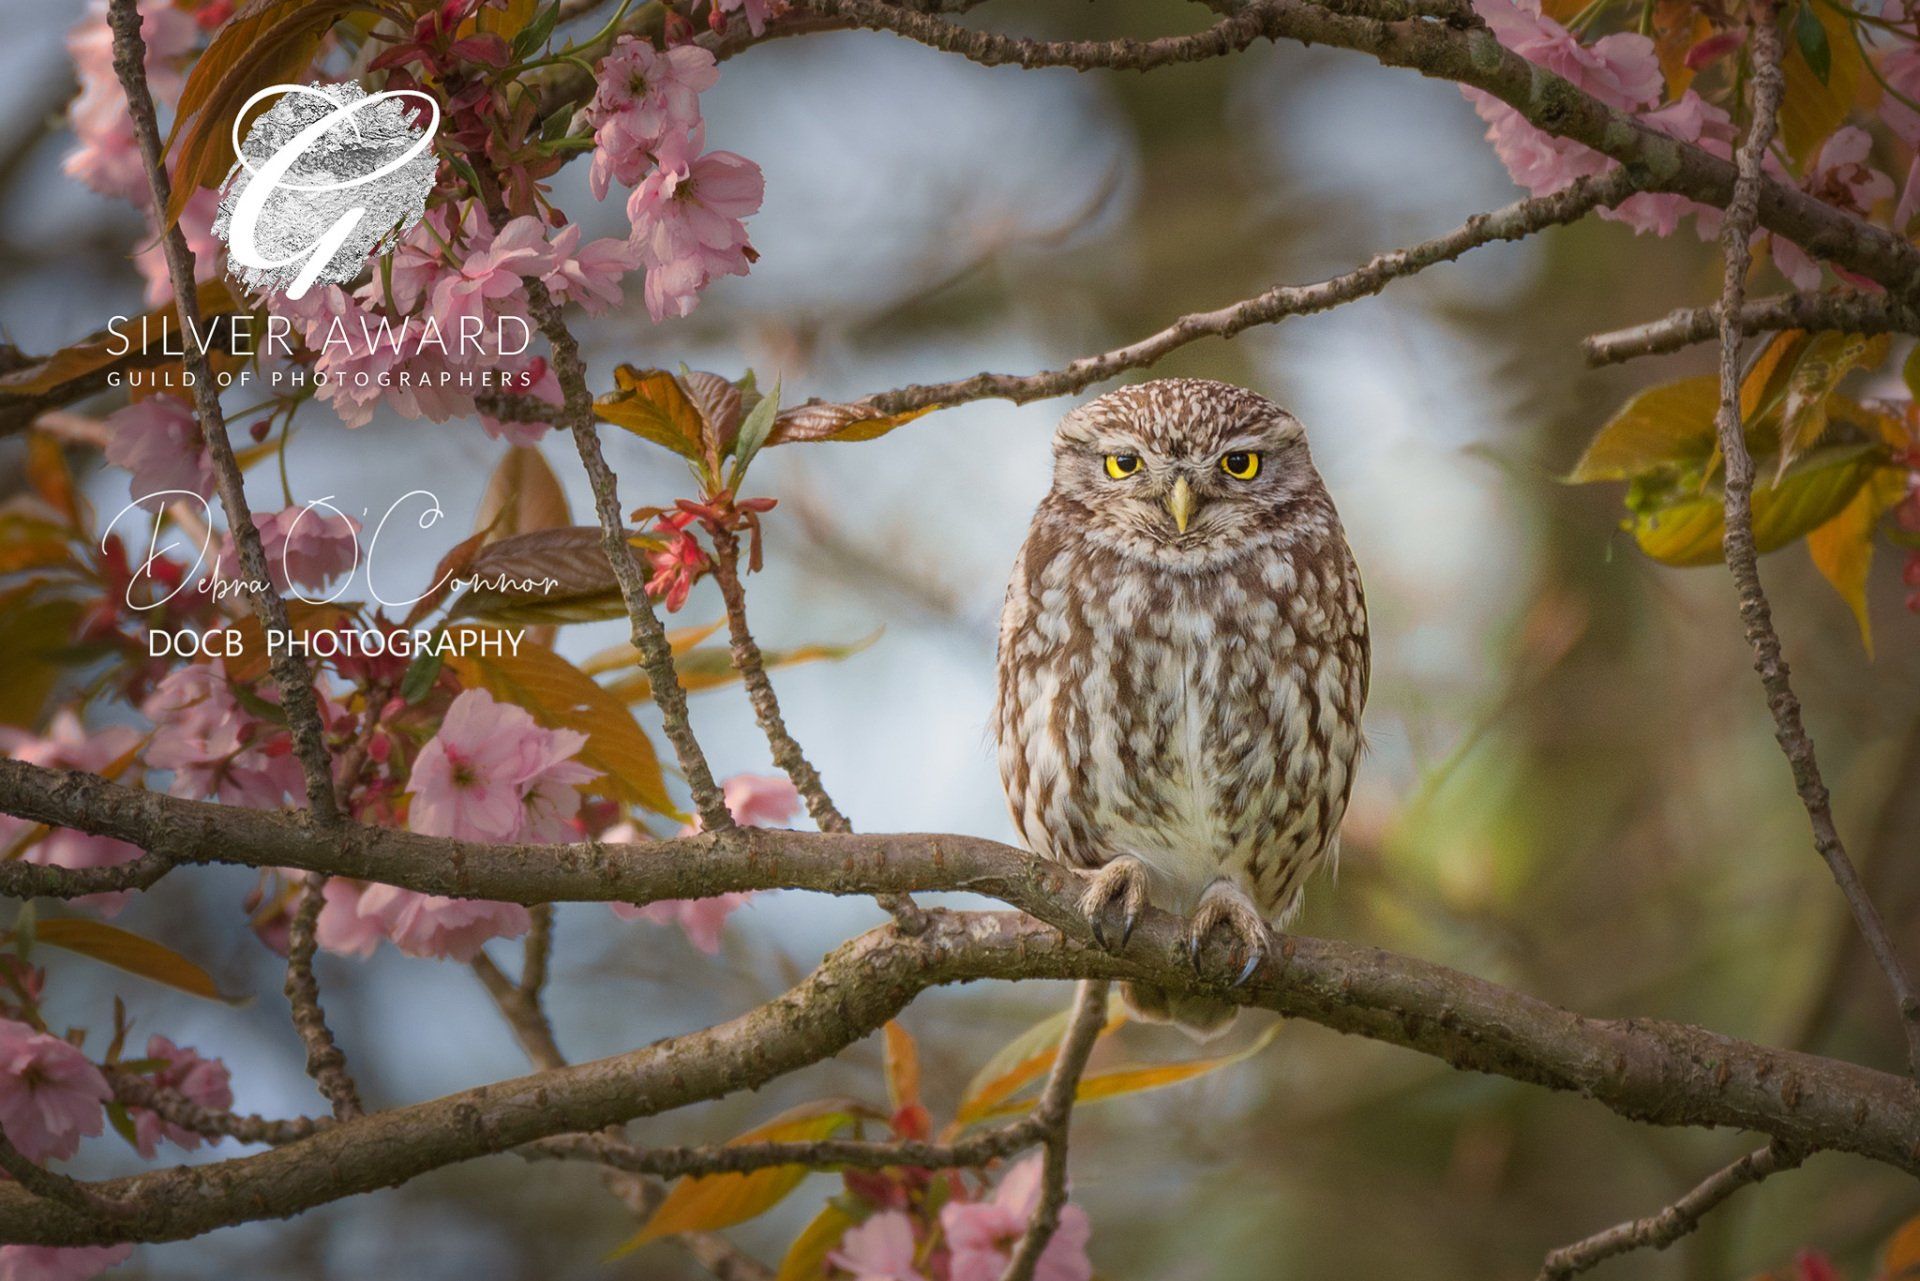 Award Winning Wildlife photographer - little owl perched on blossom branch